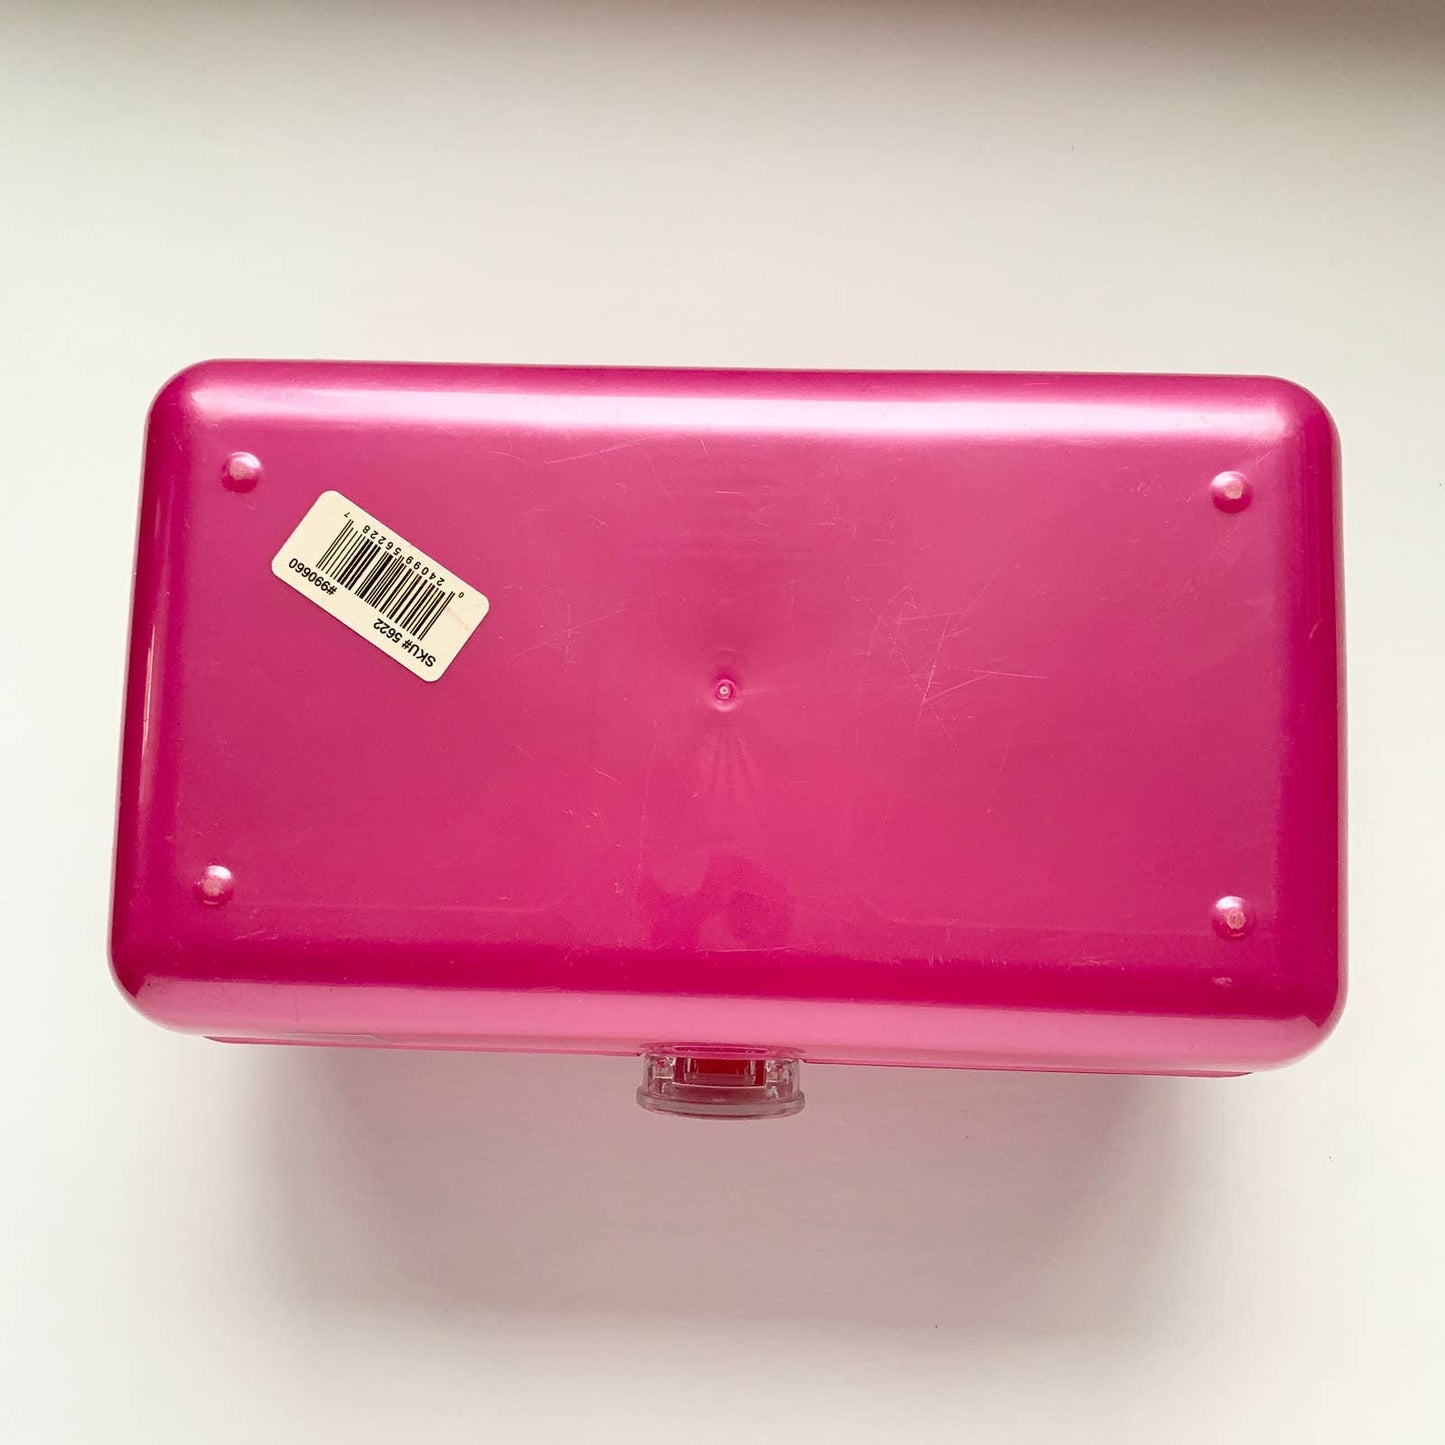 Caboodles On the Go Simone Biles 2017 Pink Cosmetic Case